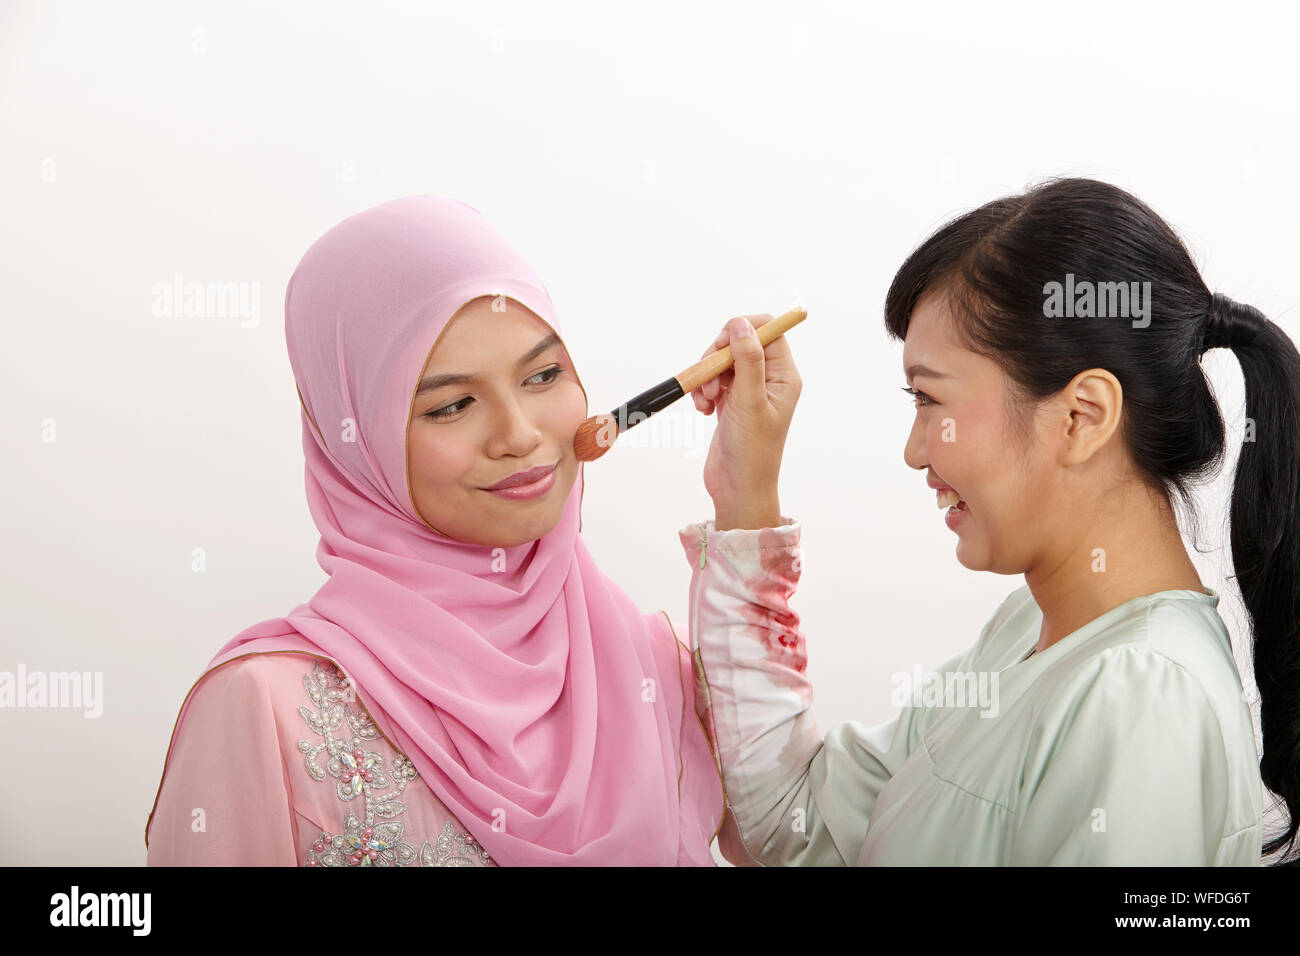 friendship, woman helping her friend putting makeup on the white background Stock Photo